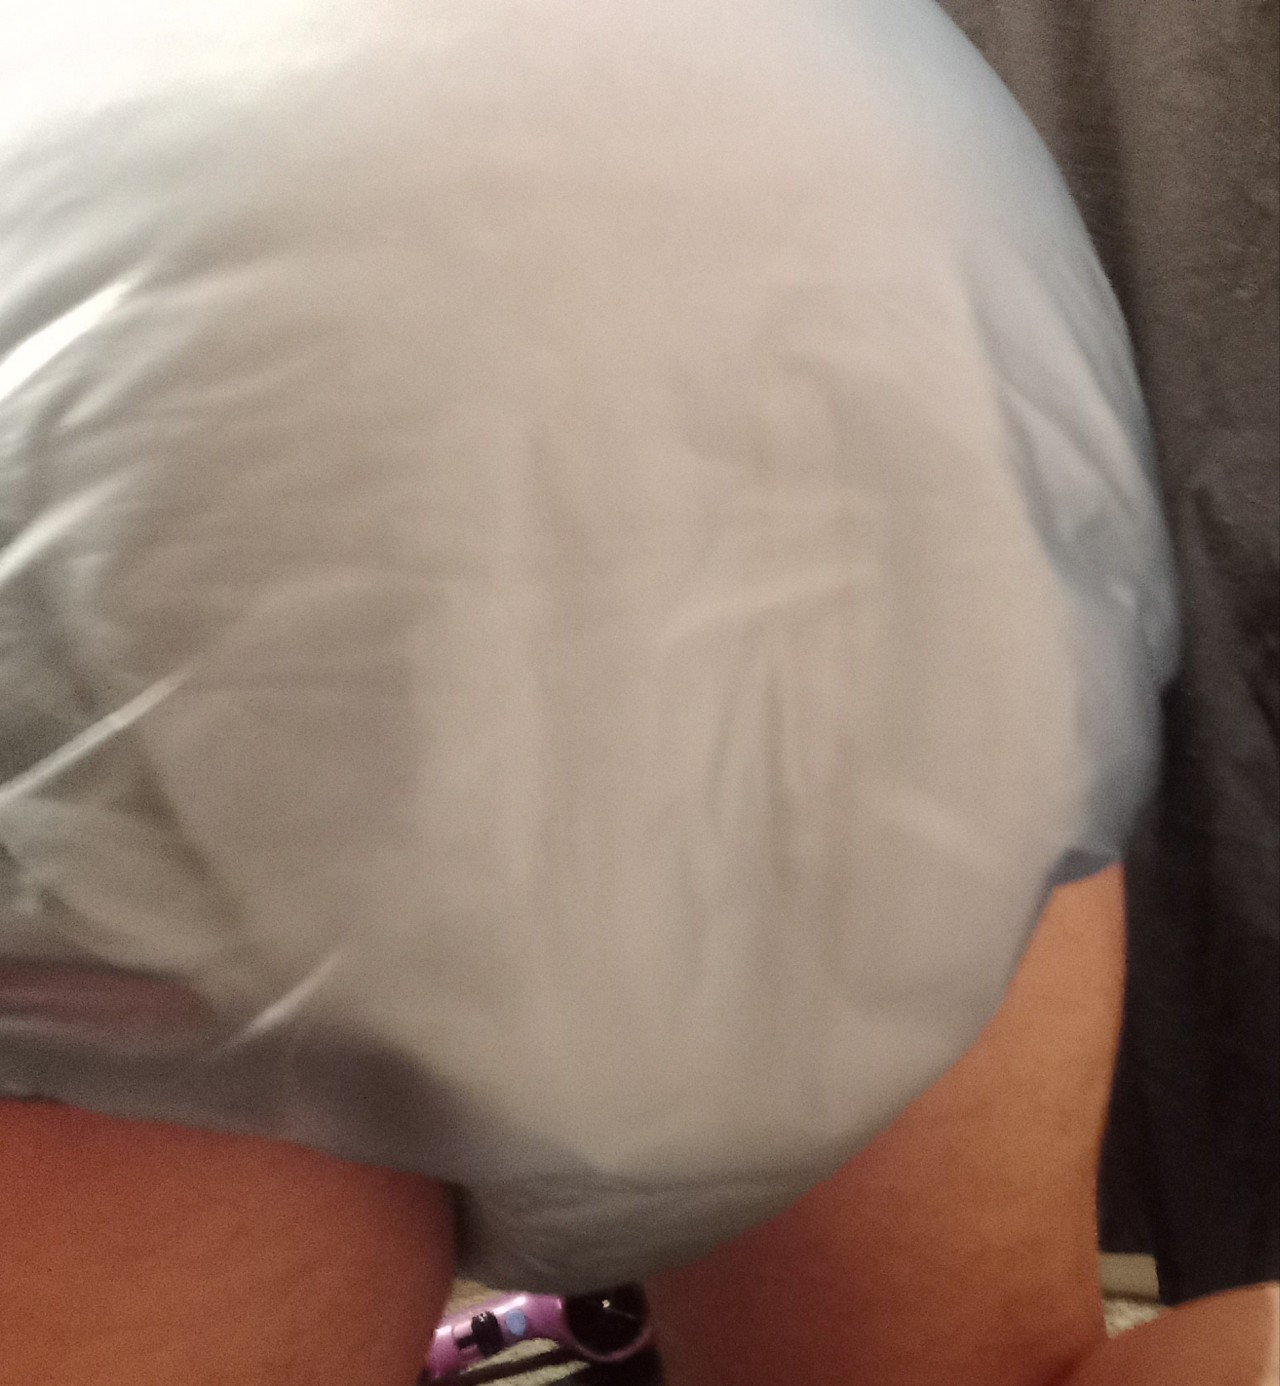 DIAPERED BED-WETTER